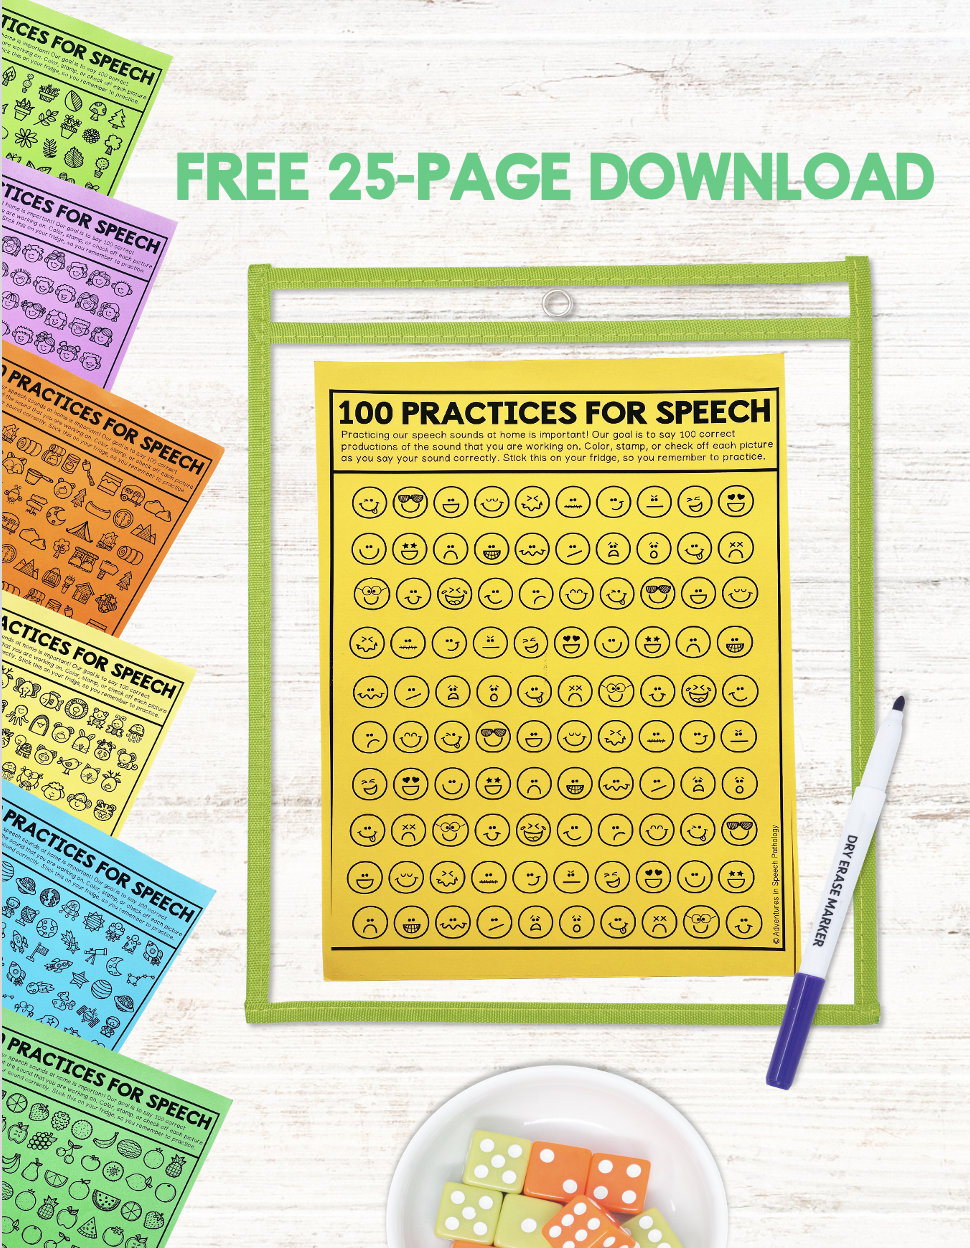 Free 25 page download